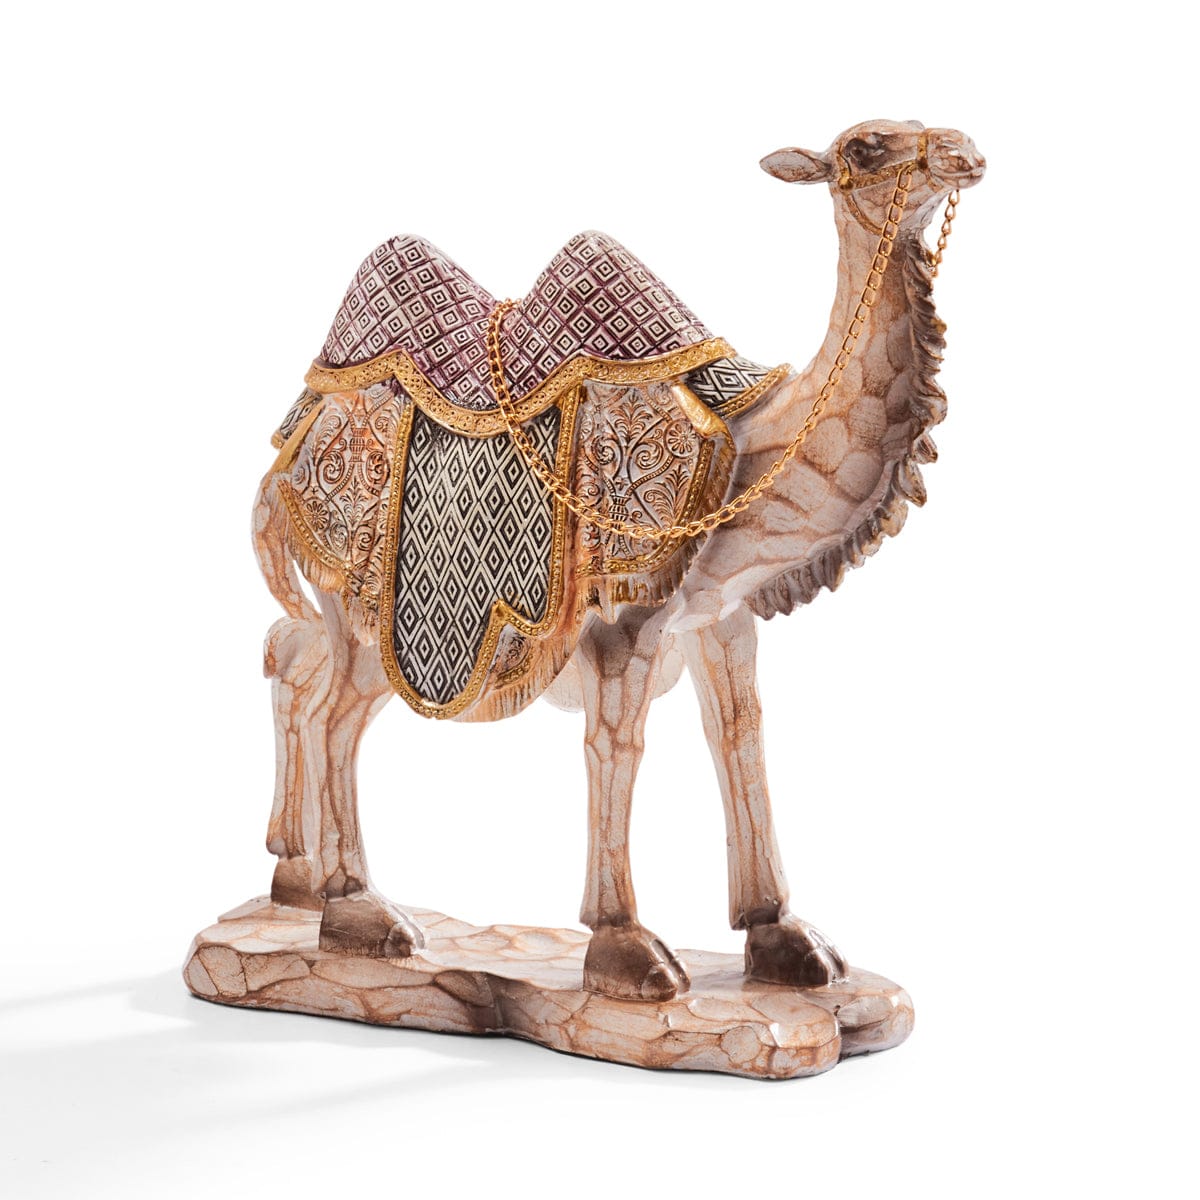 Red Butler Showpieces Dormedary Camel Big AADC00R10Y19A1 ADC10A1 Camel Showpiece – Elegance Inspired by Middle Eastern Artistry | Animal figurine showpieces Redbutler